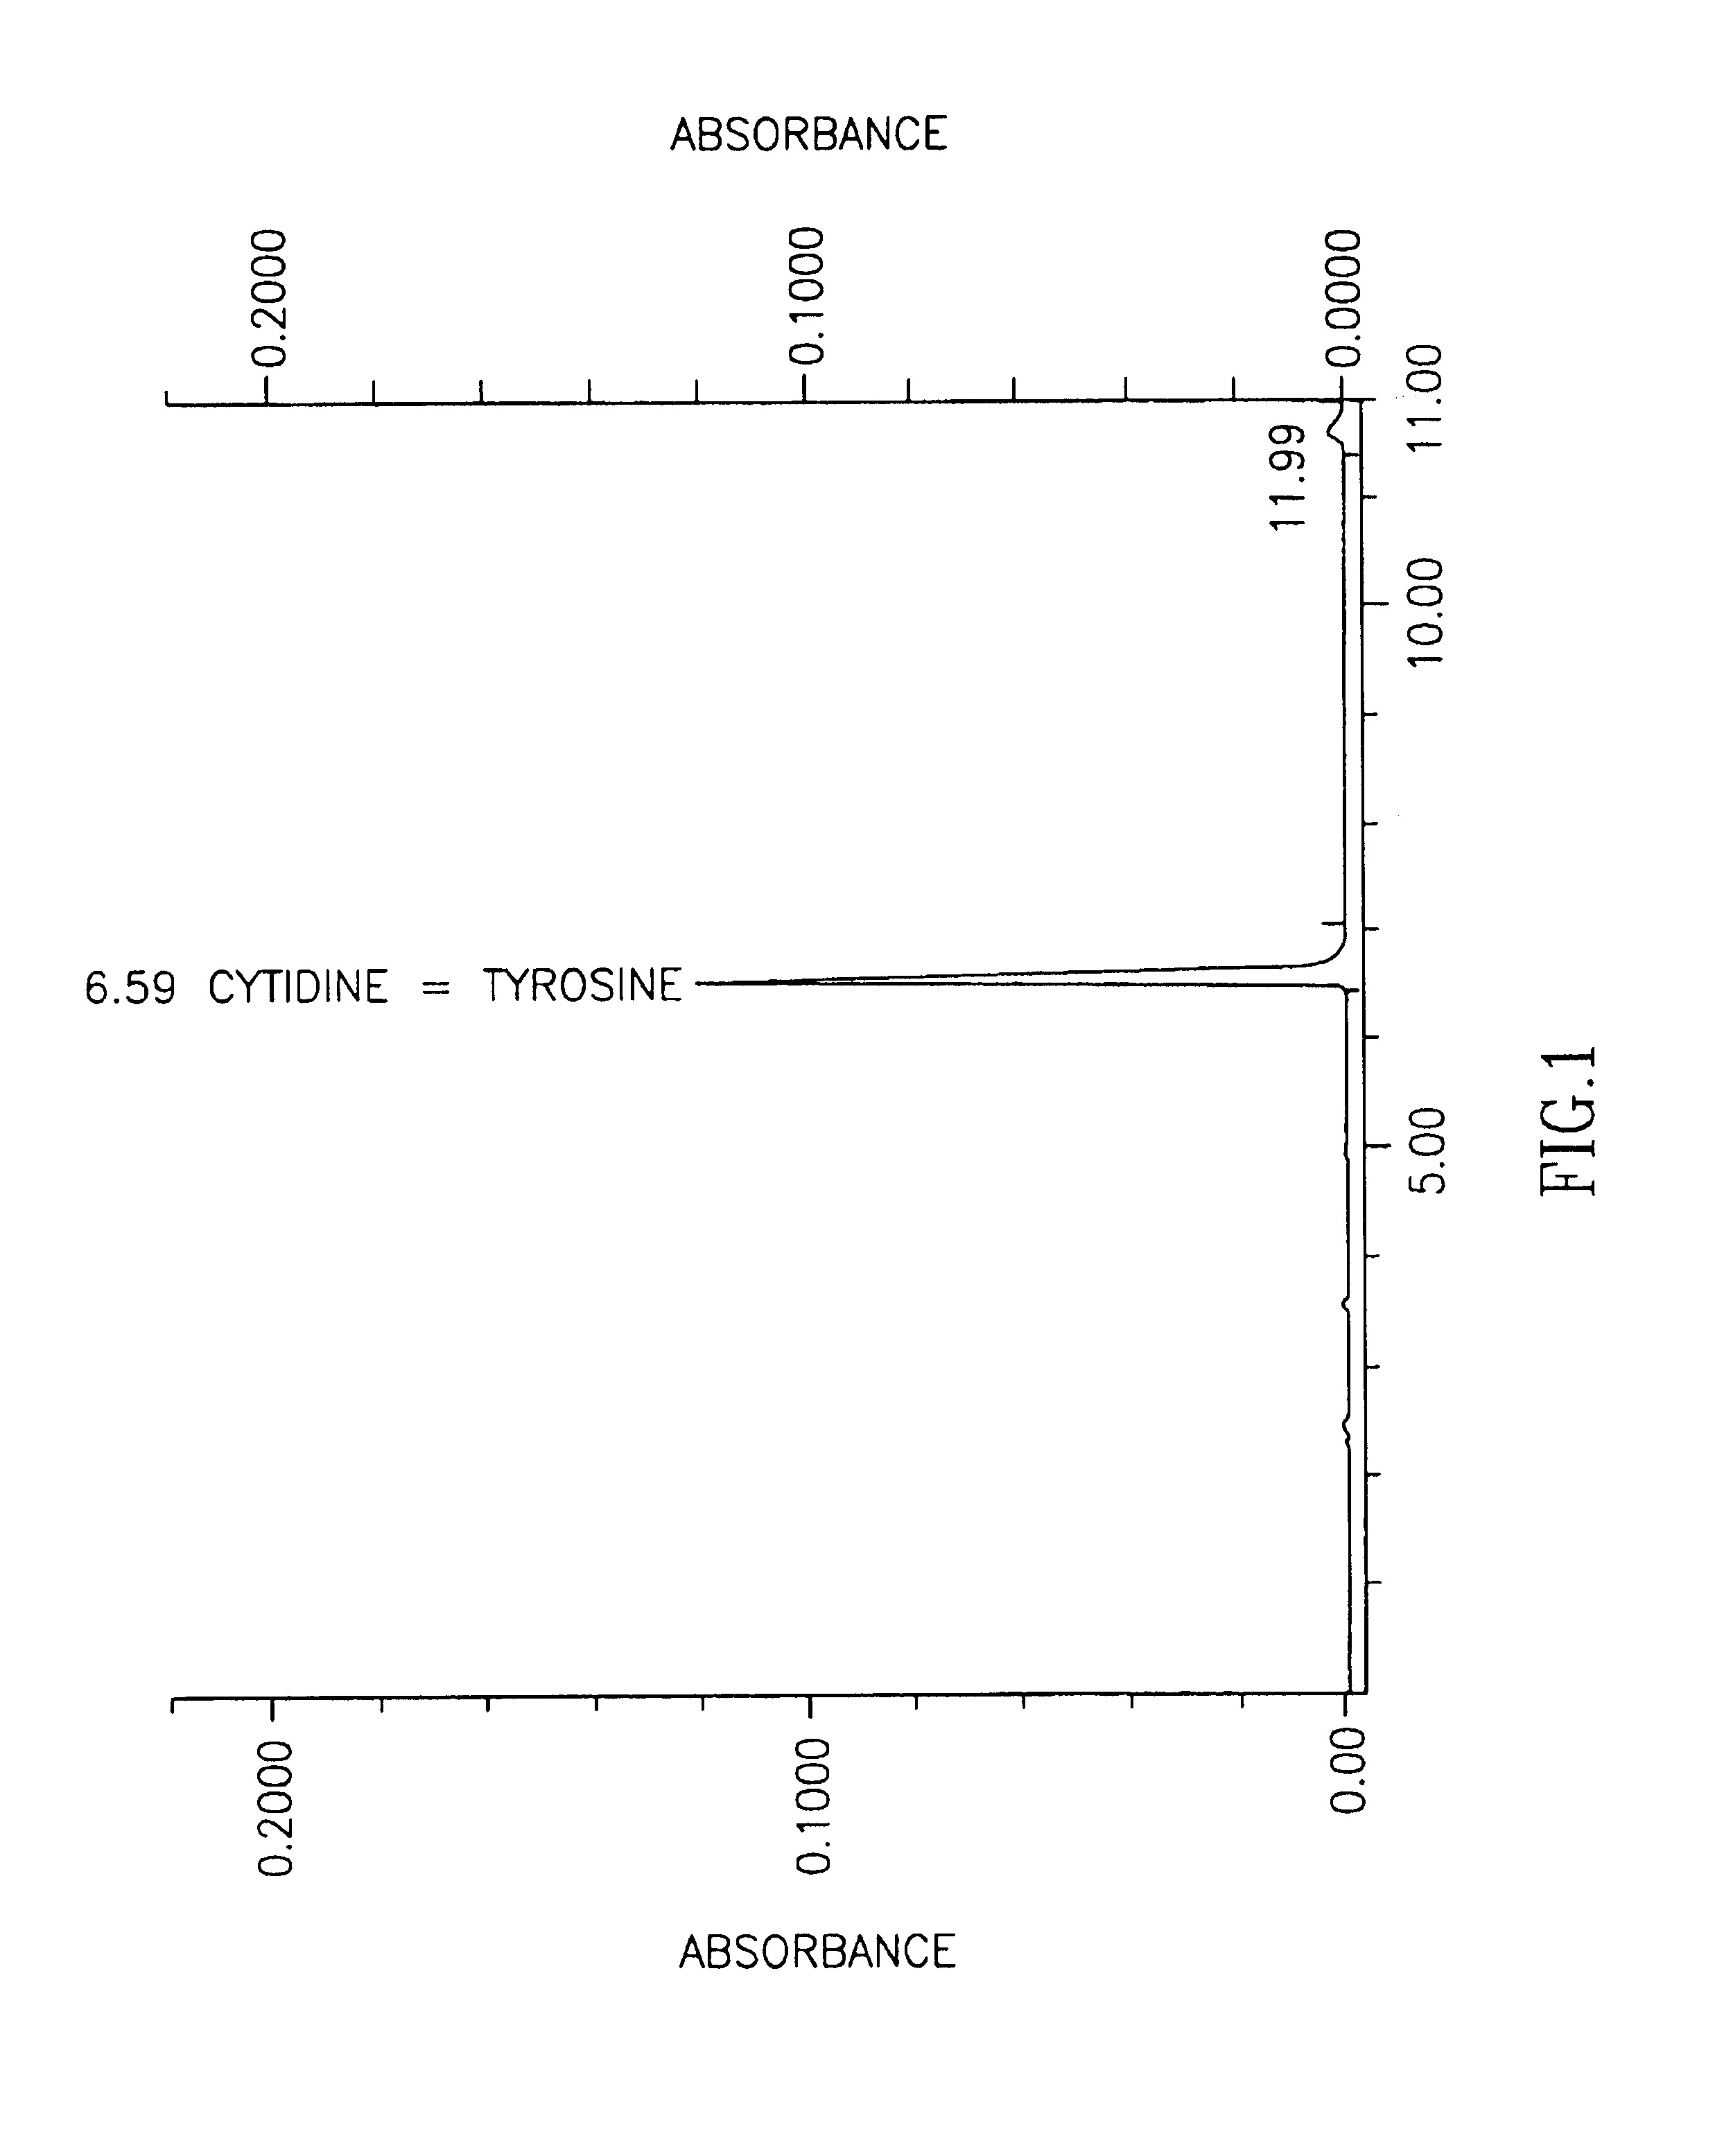 Methods for increasing blood cytidine and/or uridine levels and treating cytidine-dependent human diseases